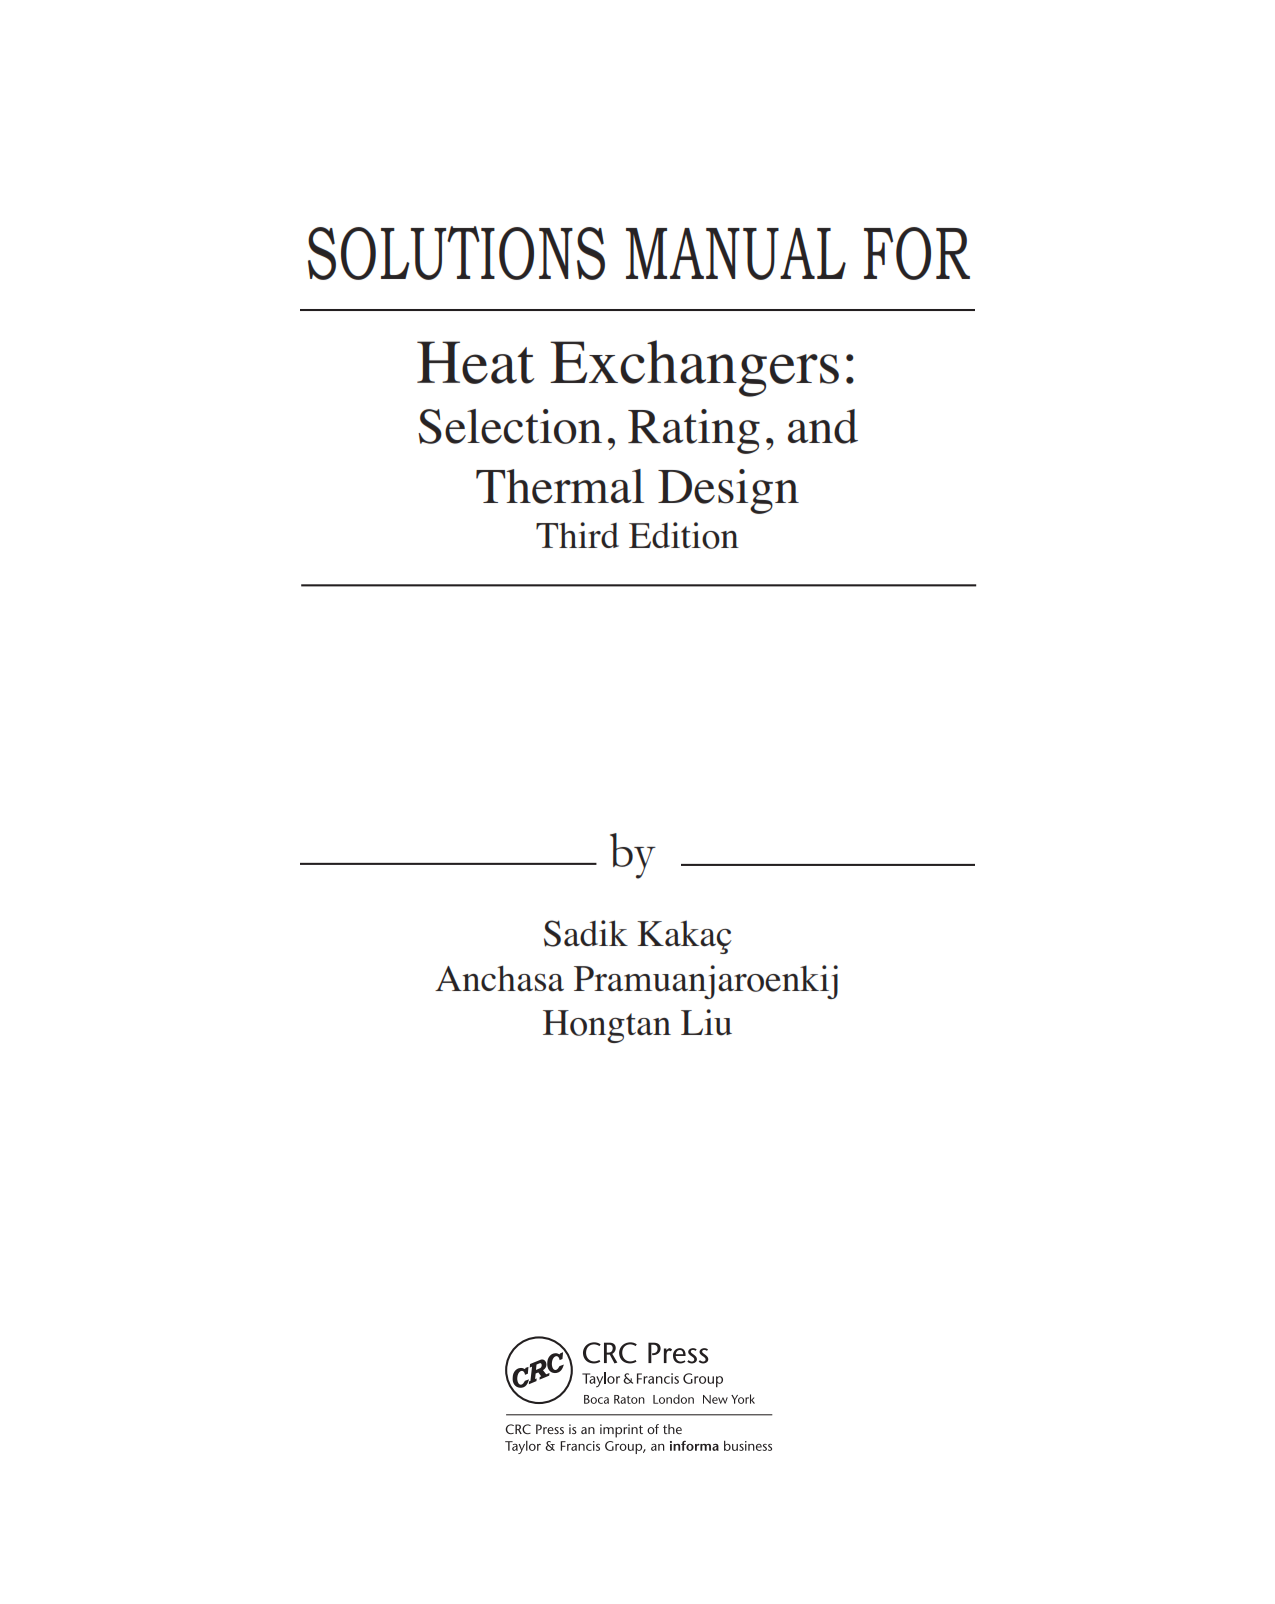 download free Solution manual of Heat Exchangers | Selection , Rating and Thermal Design 3rd edition book in pdf format